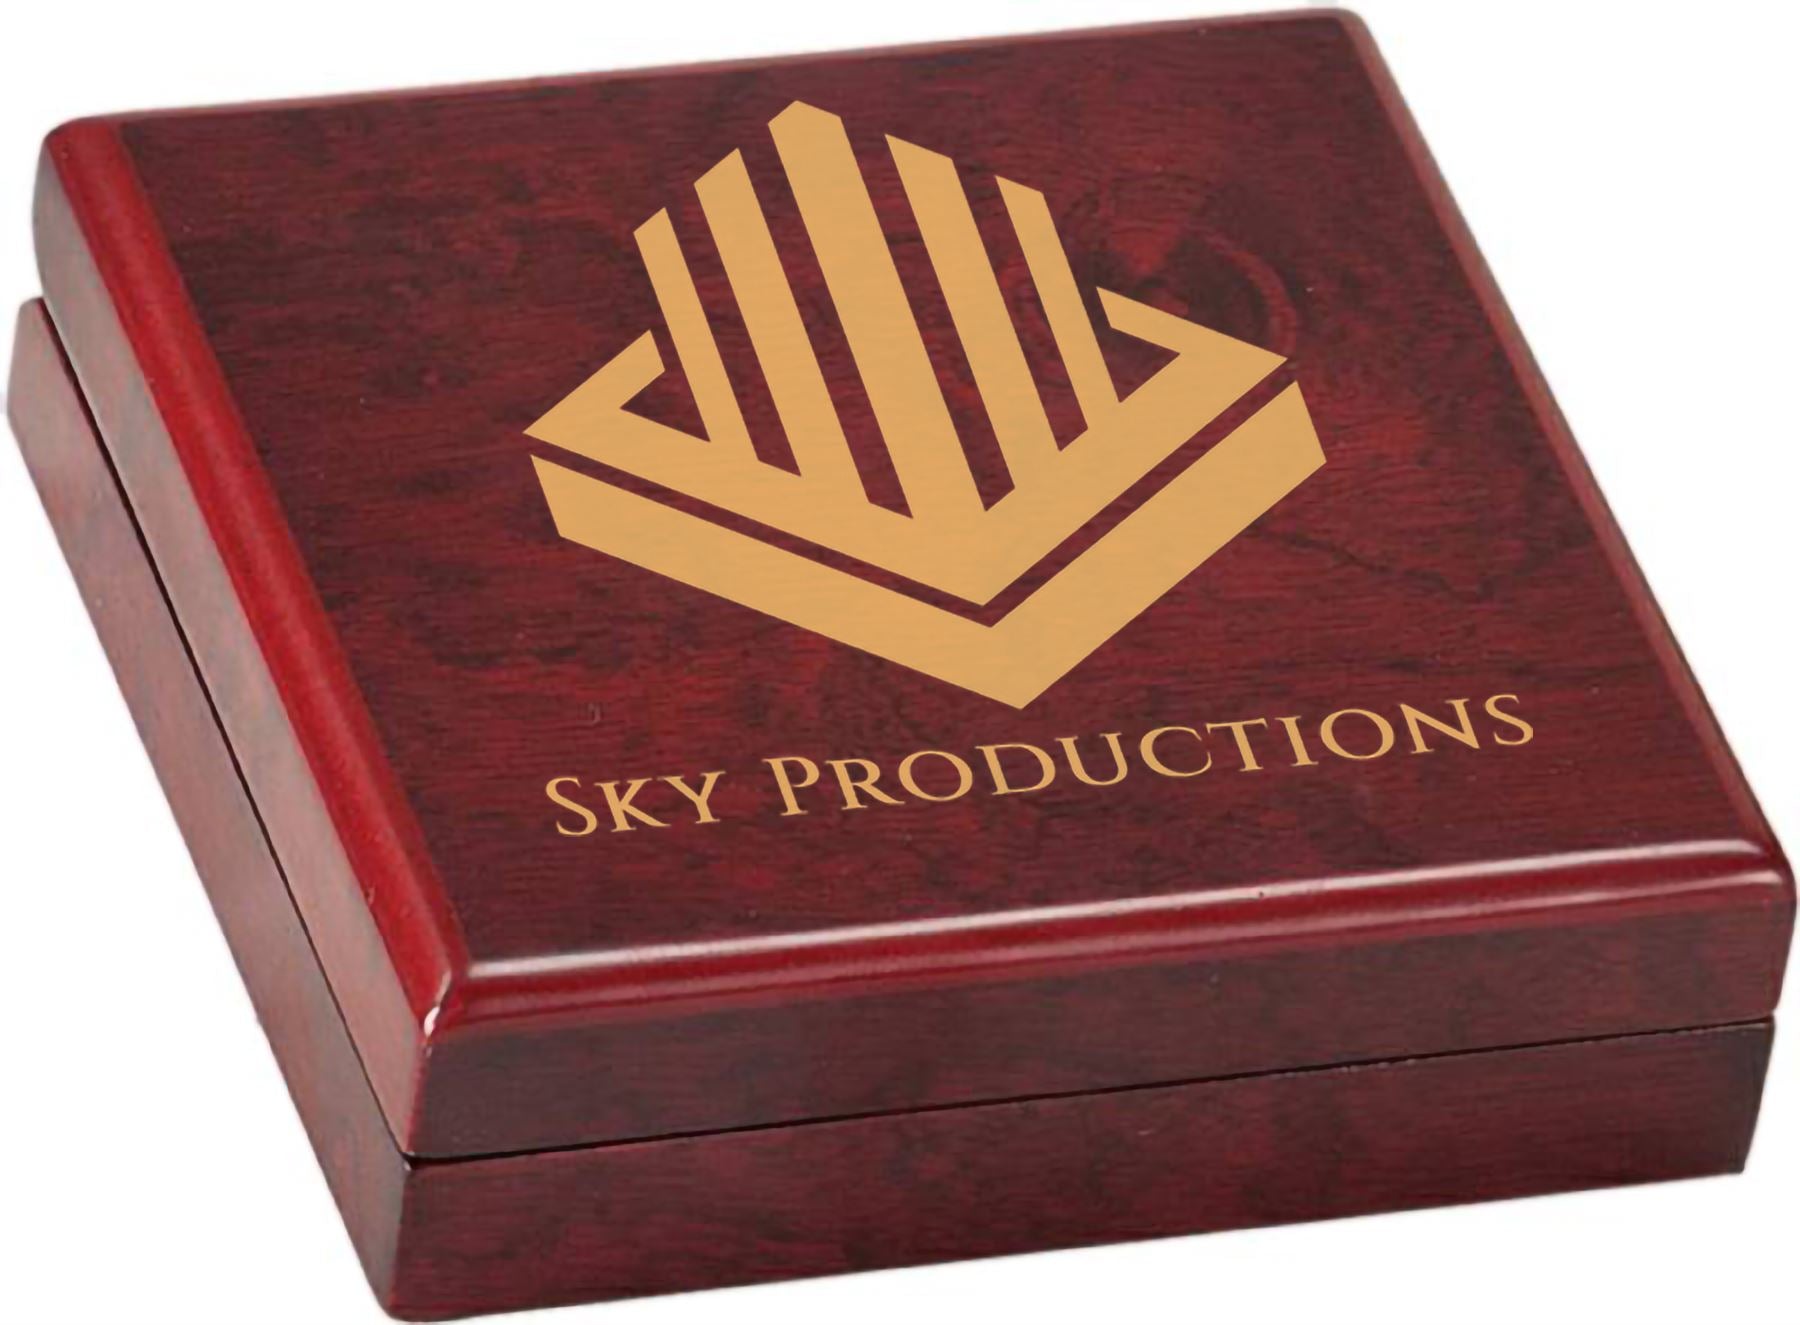 Rosewood Piano Finish Gift Box, 4 1/4" x 4 1/4", Laser Engraved Gift Box Craftworks NW 